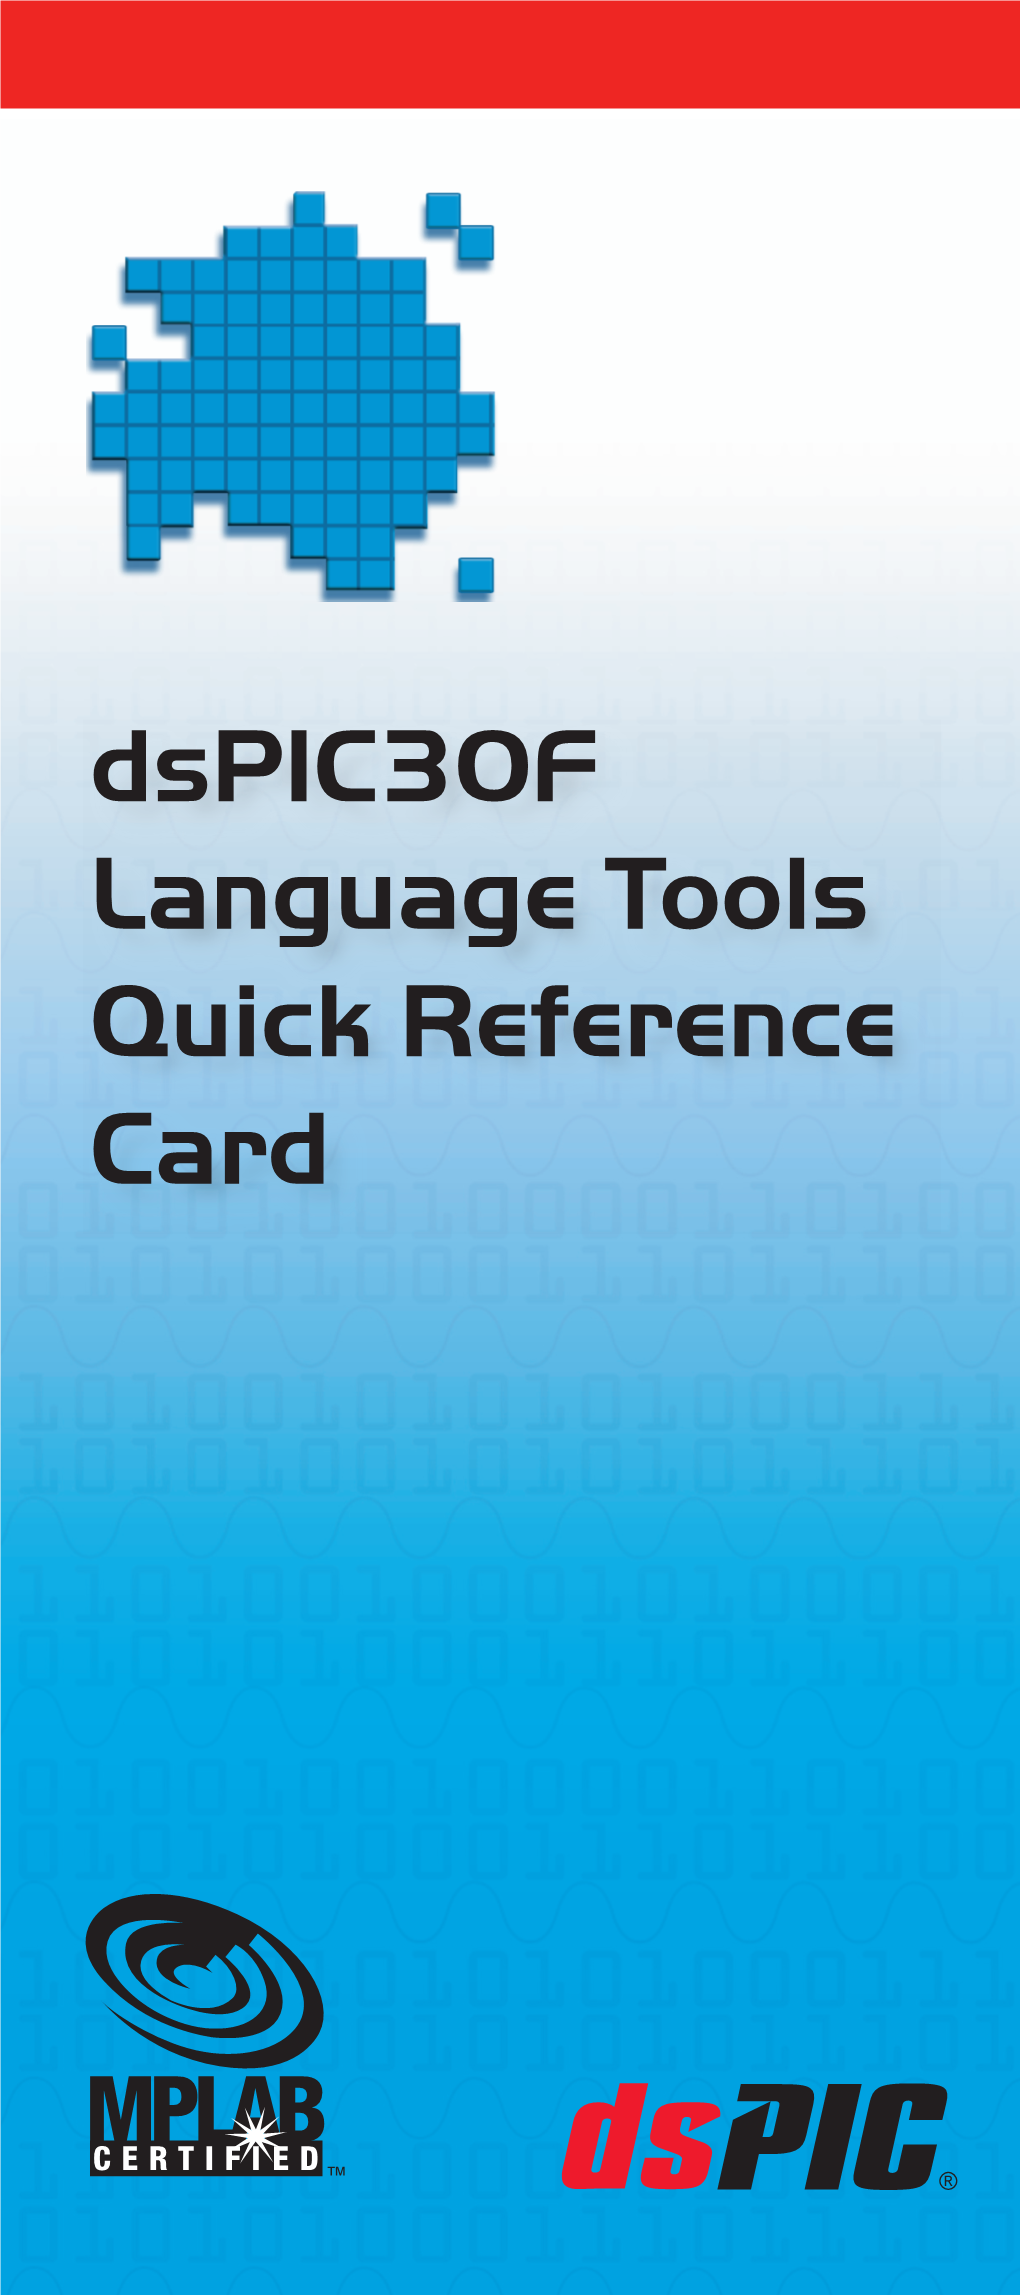 Dspic30f Language Tools Quick Reference Card